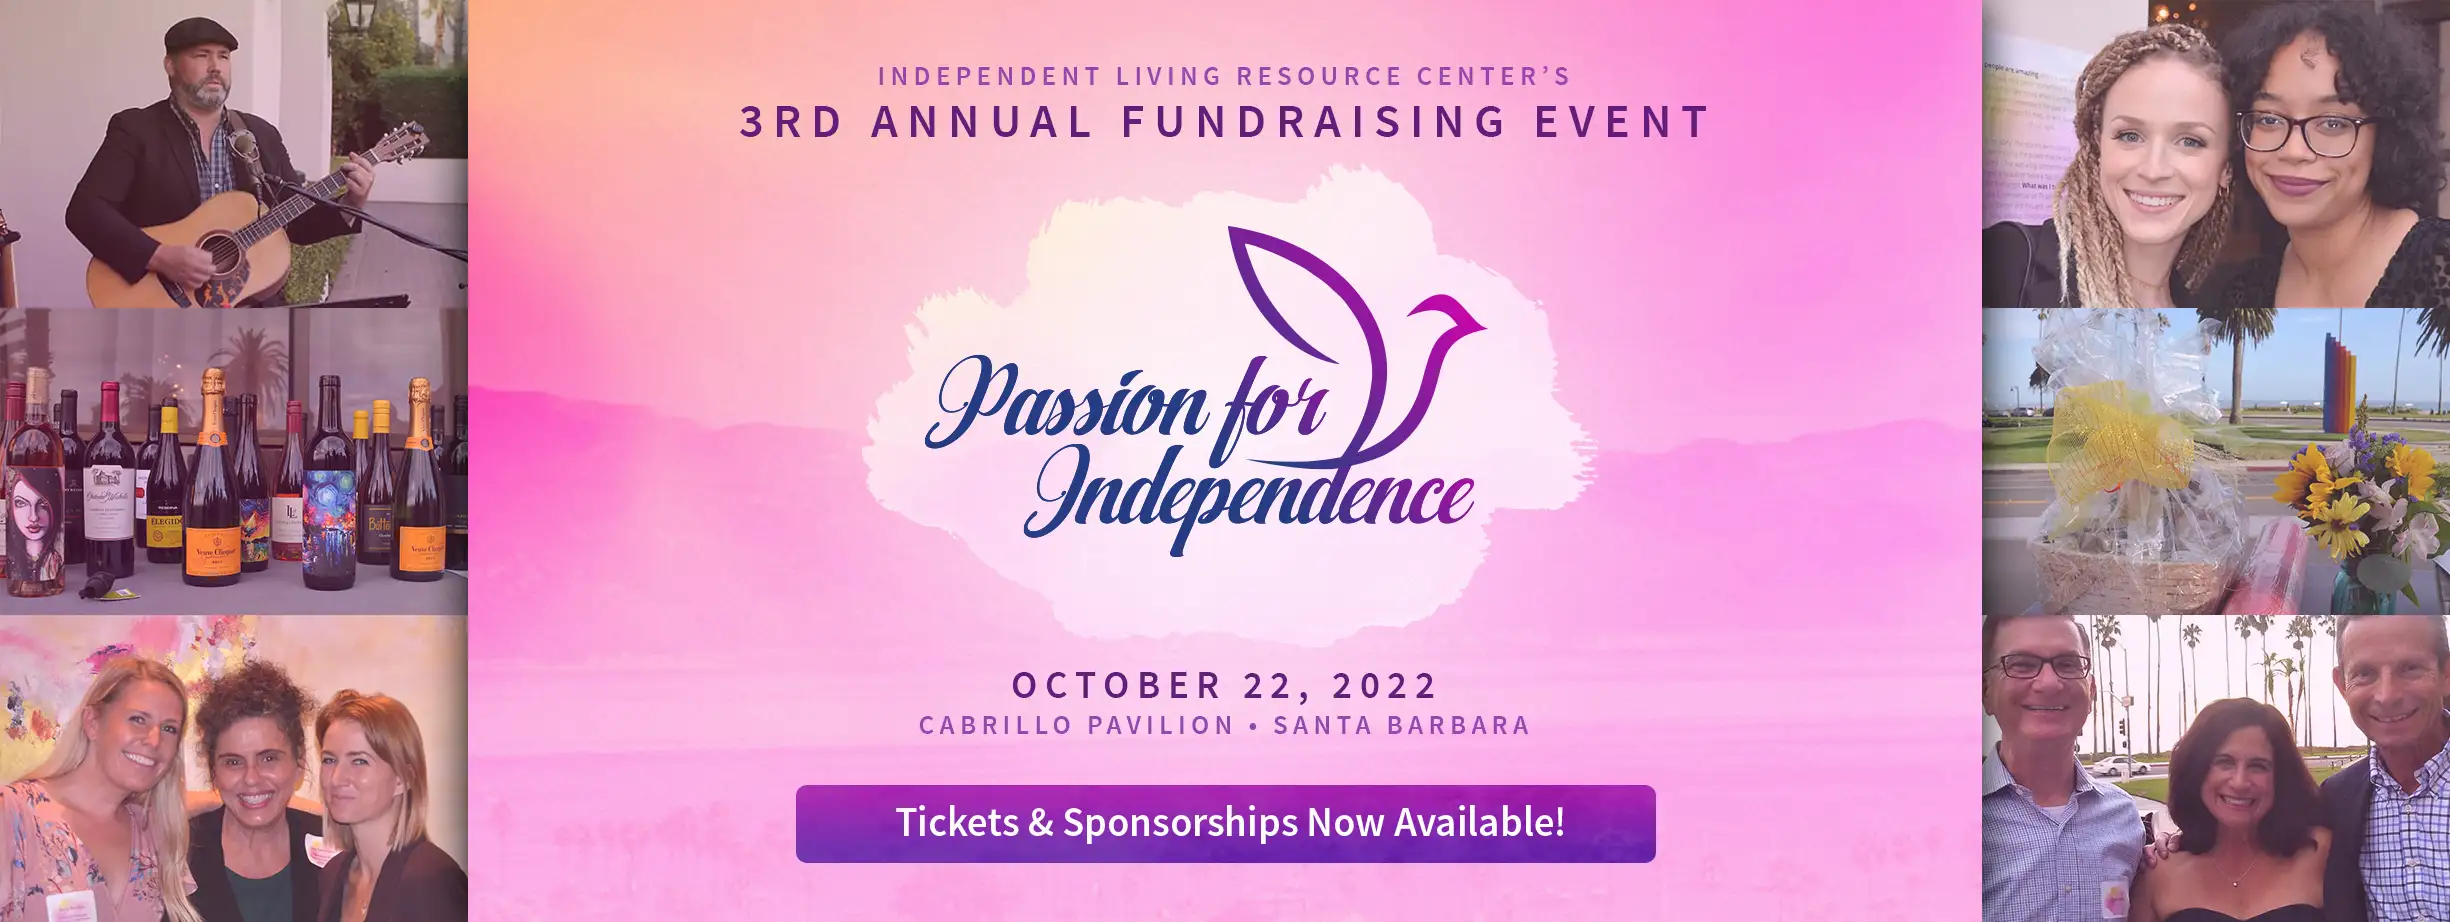 3rd Annual Passion for Independence ILRC's Annual Fundrasing Event. October 22, 2022 at the Cabrillo Pavilion in Santa Barbara. Click here for tickets and sponsorships!